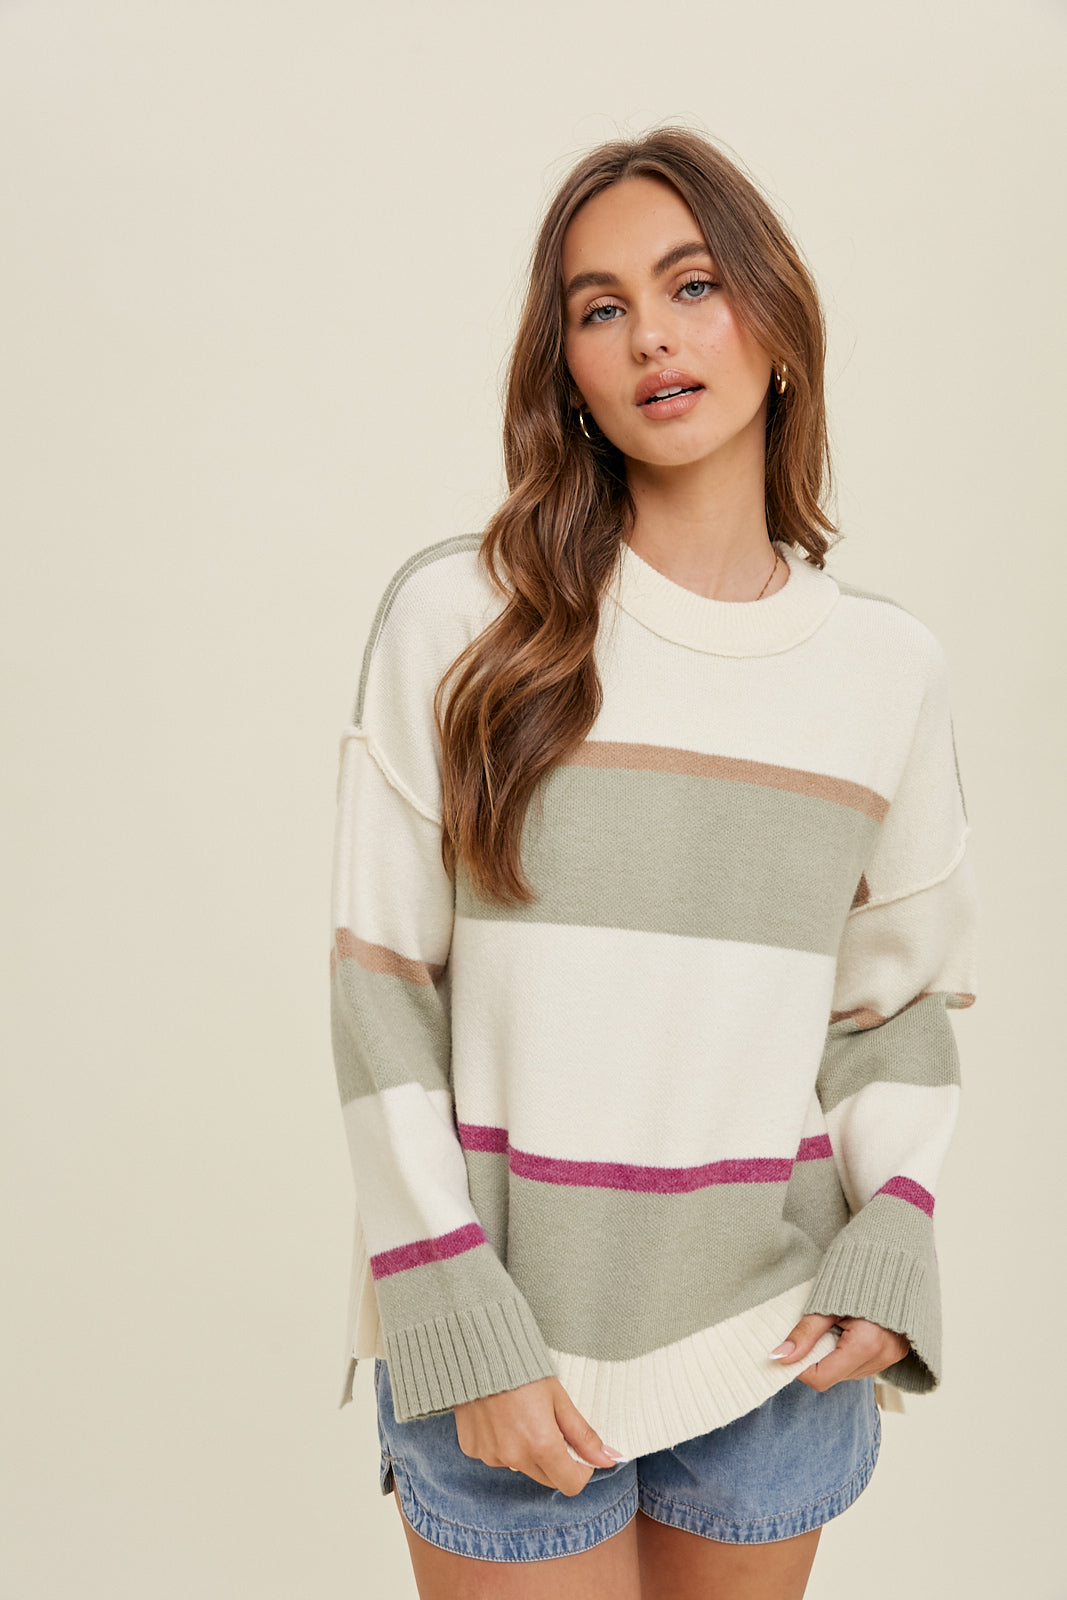 High Low Multicolor Striped Sweater in cream and sage color.